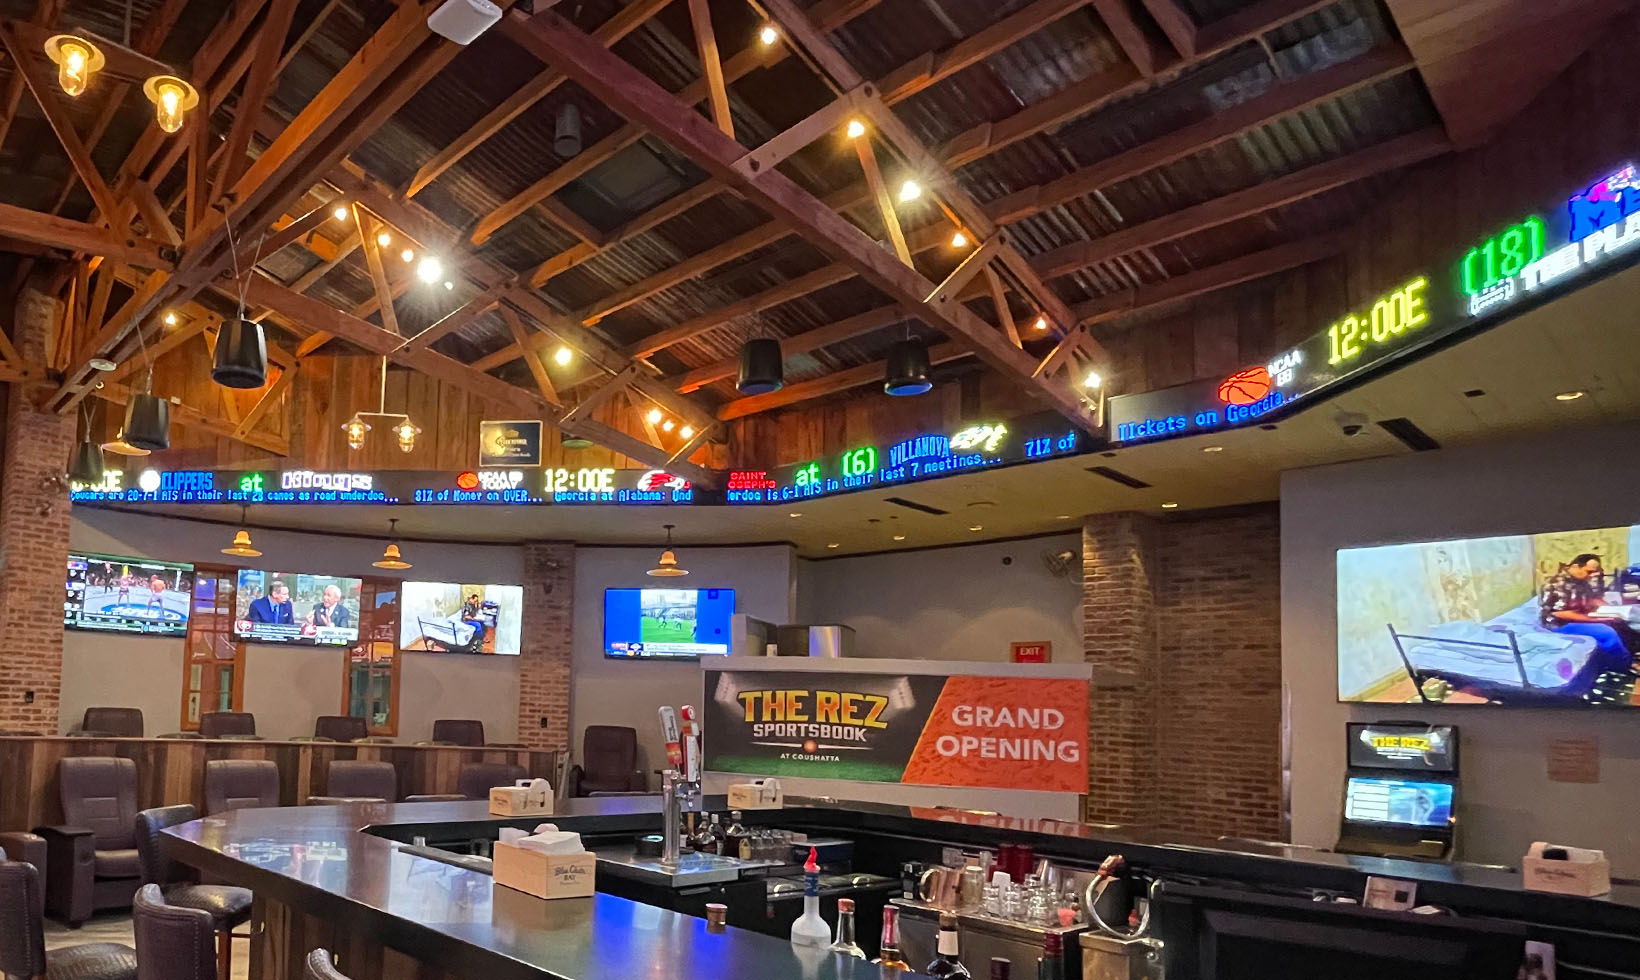 LED tickers at Coushatta's "The Rez" Sportsbook